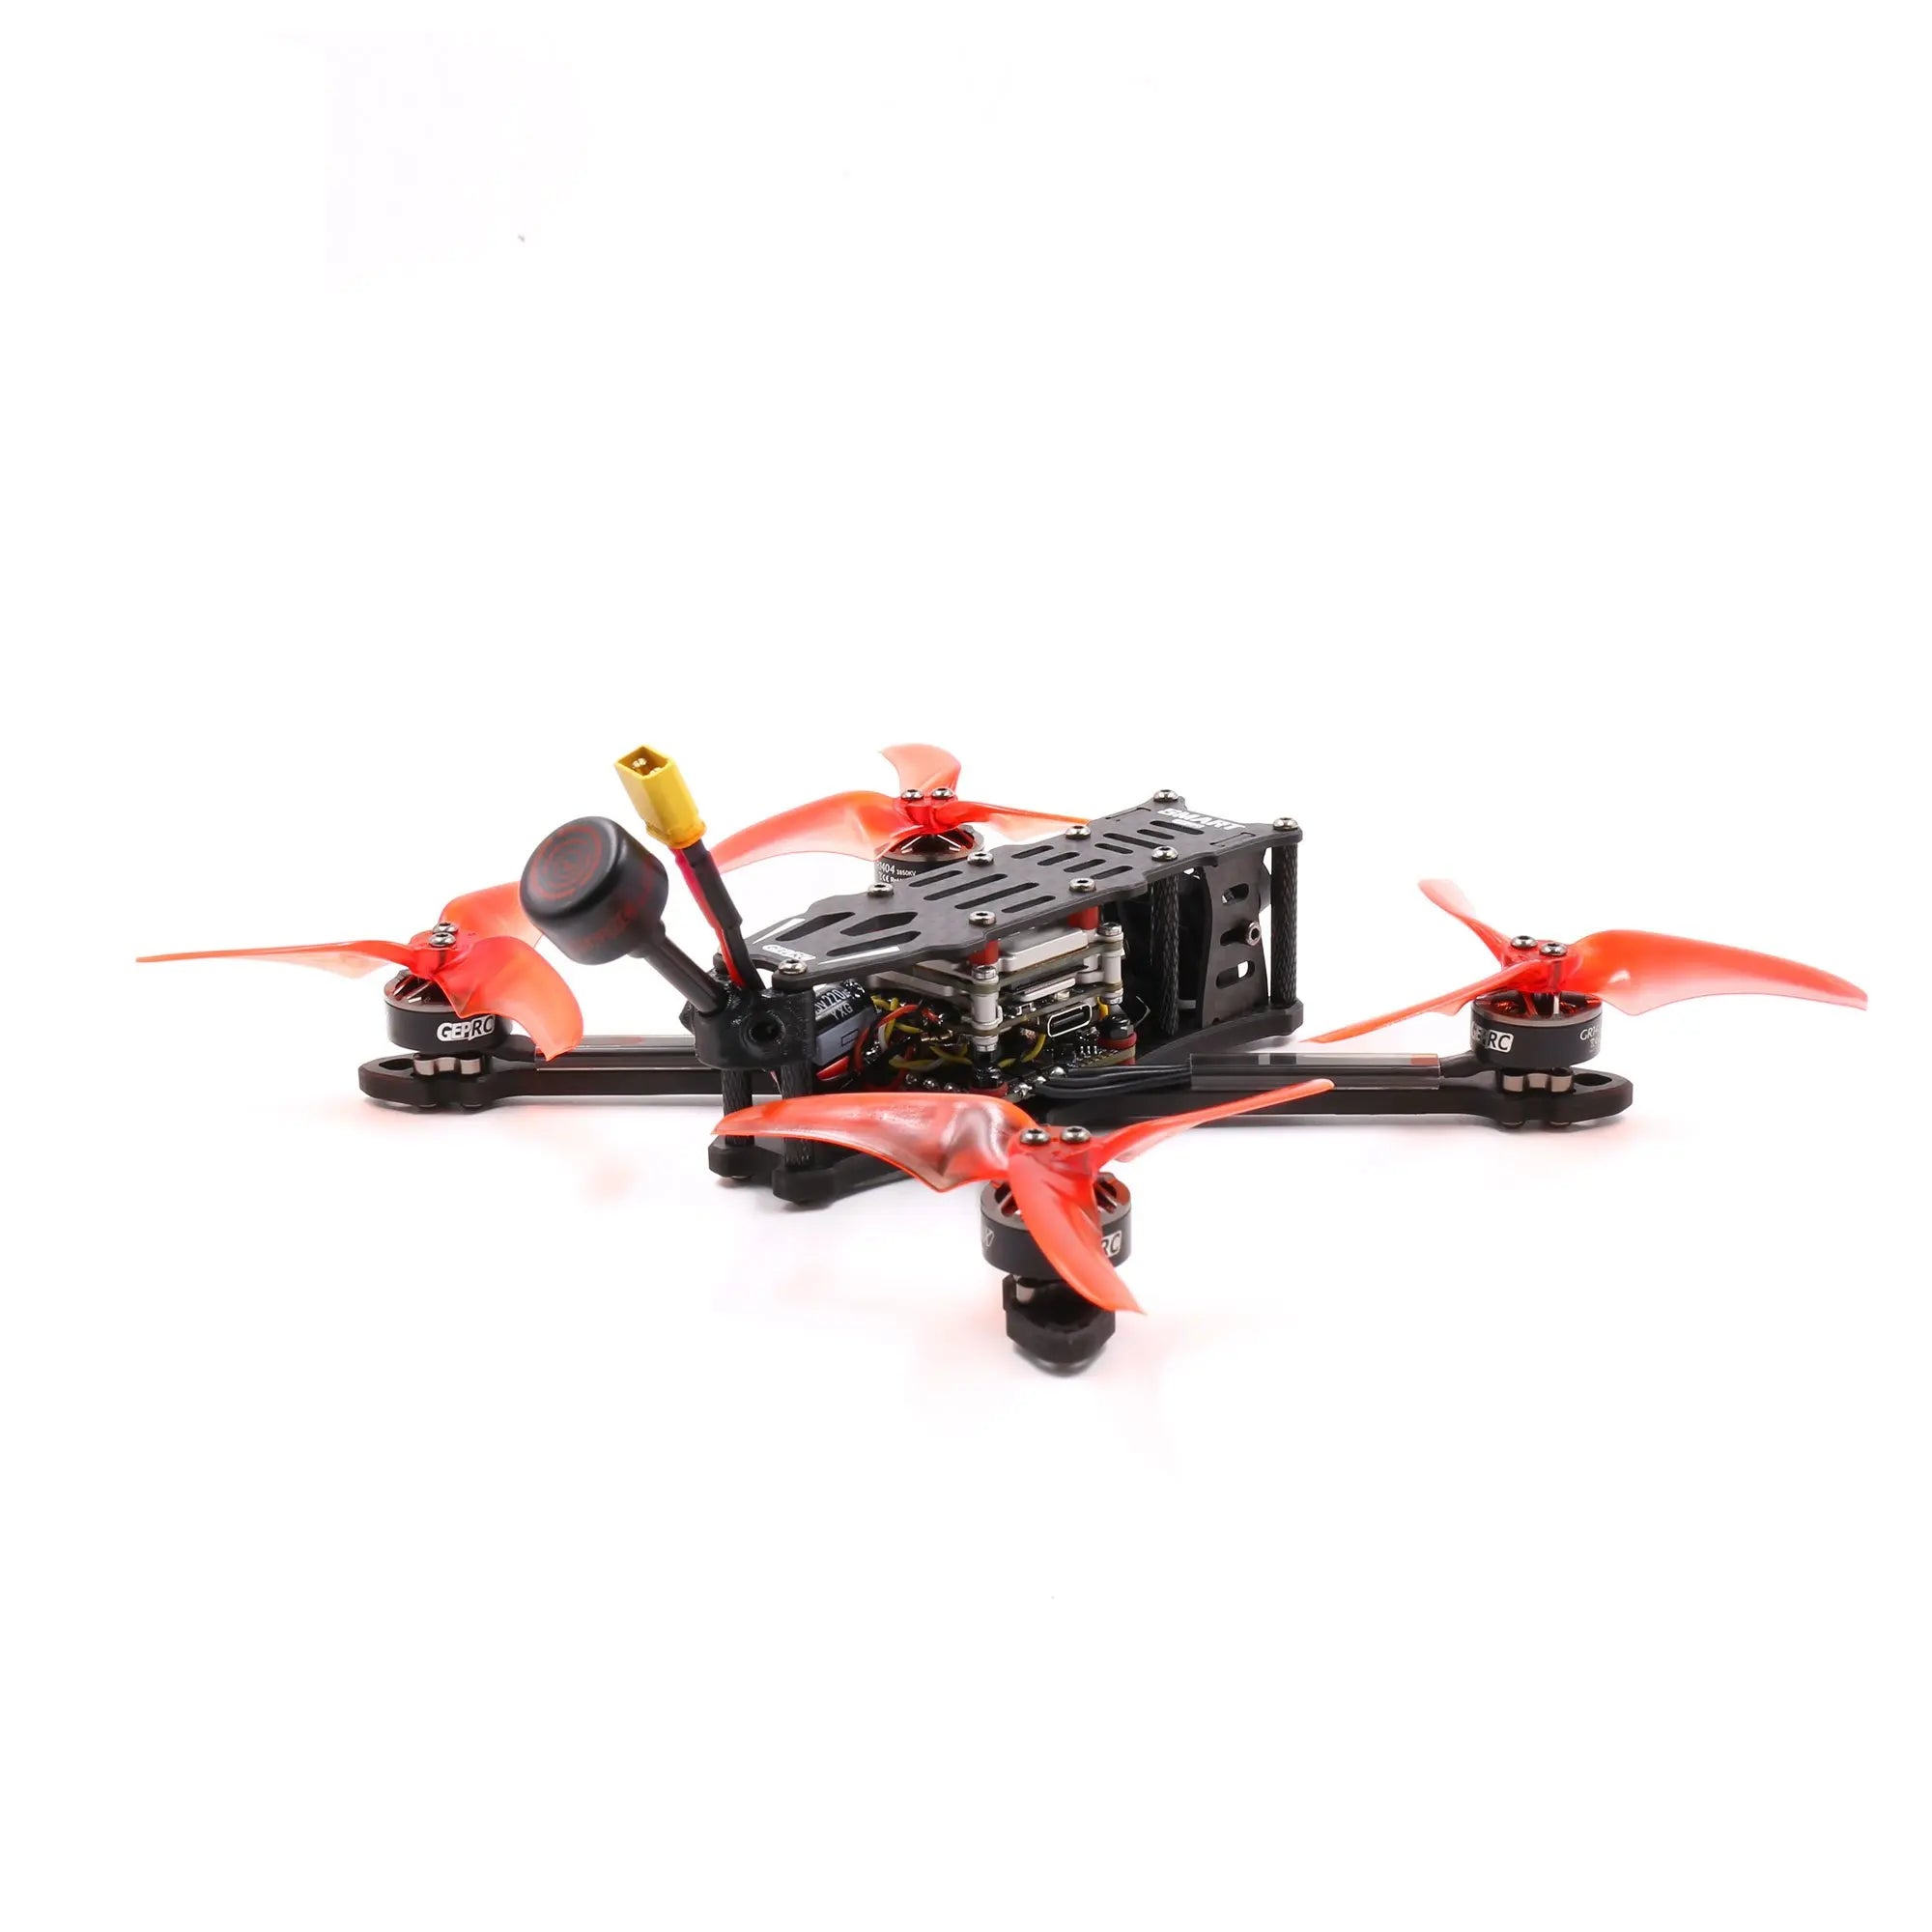 GEPRC SMART 35 FPV Drone, Using the mainstream F411 AIO flight system, the electronic system runs more stab